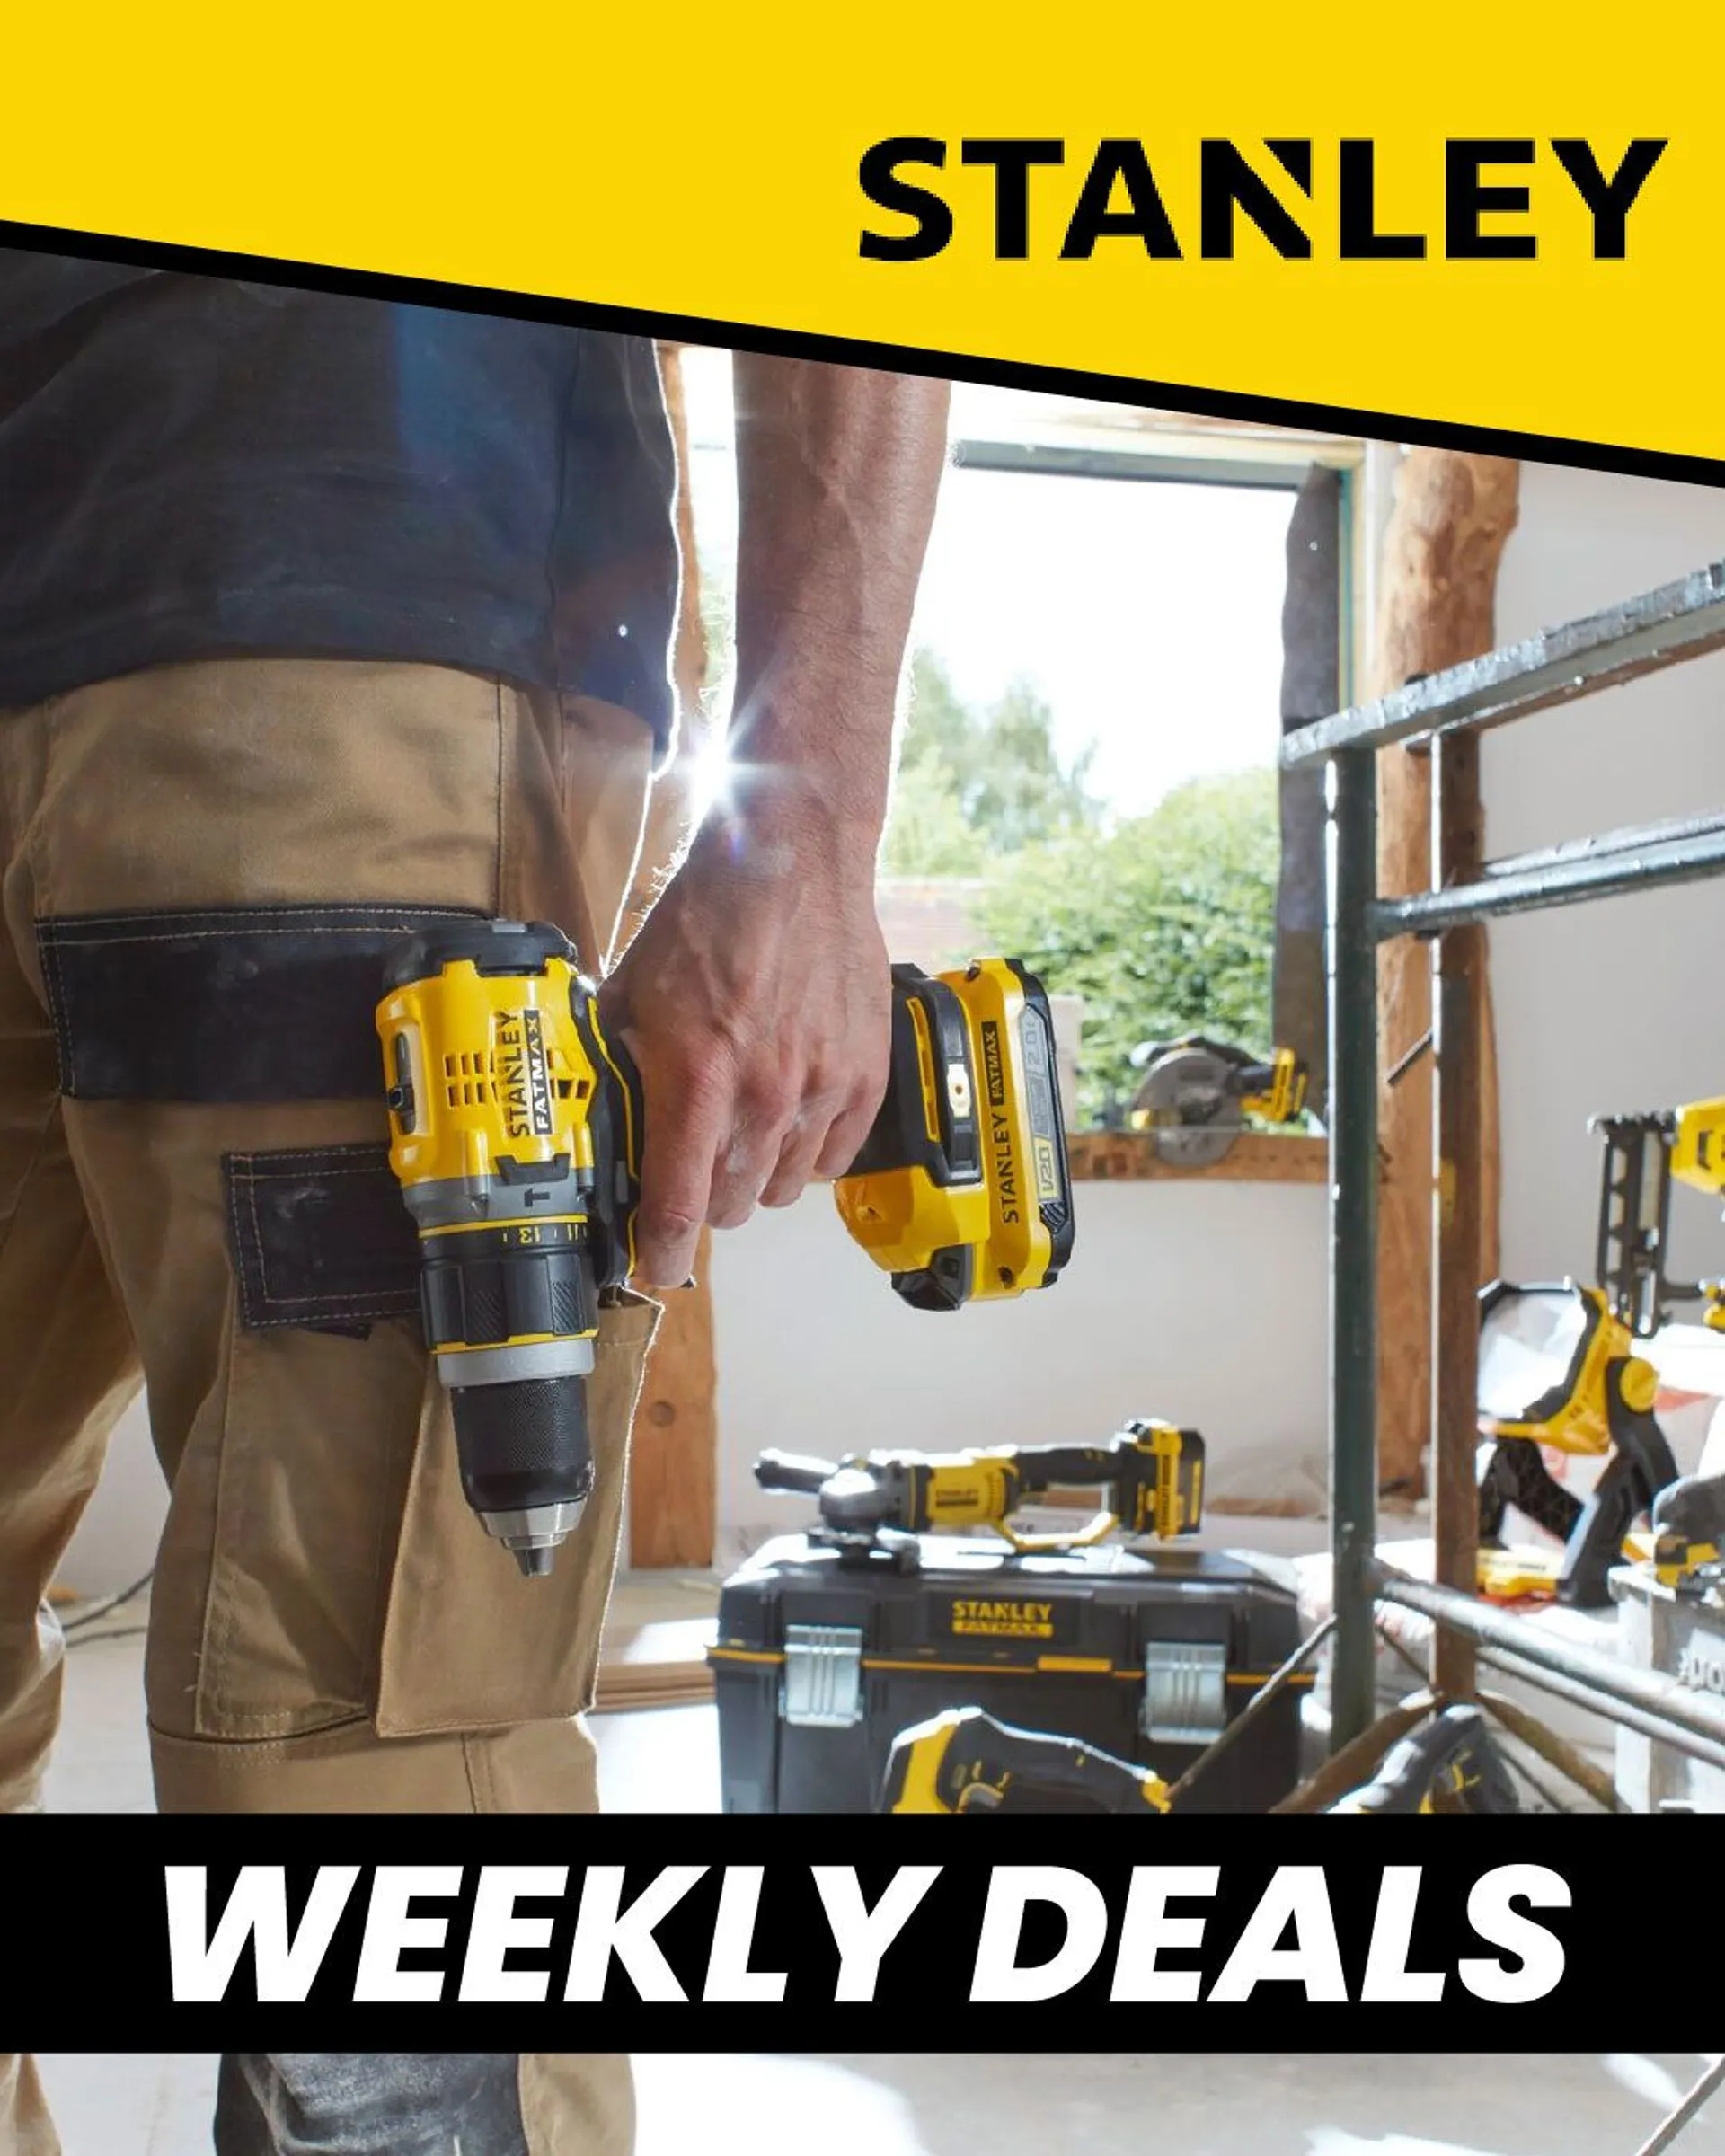 Weekly ad Stanley - Weekly Deals  from January 10 to January 15 2023 - Page 1